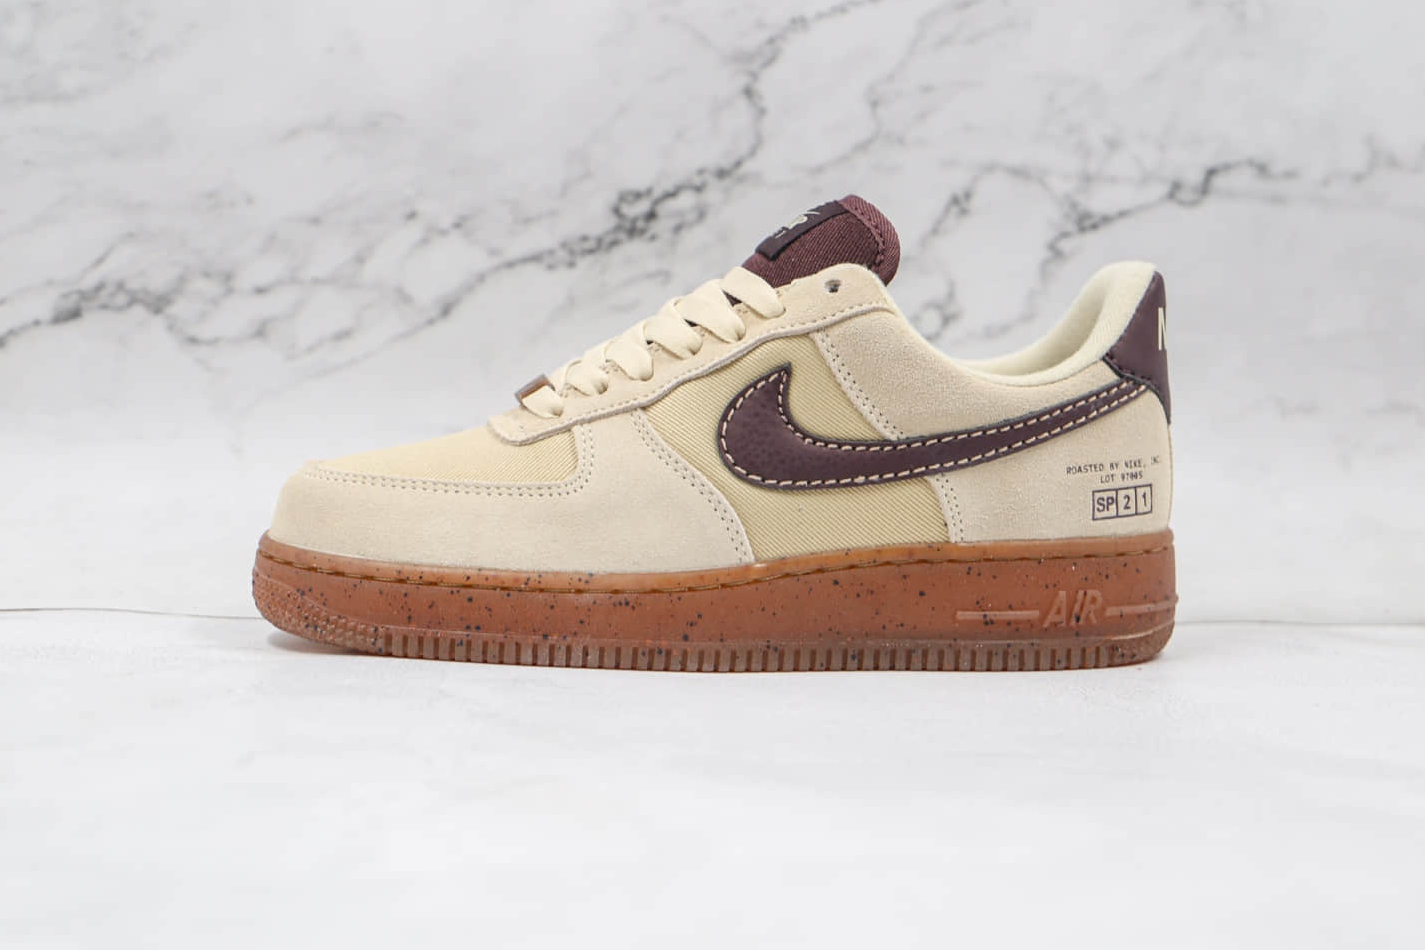 Nike Air Force 1 Low 'Coffee' DD5227-234 - Stylish and Comfortable Footwear